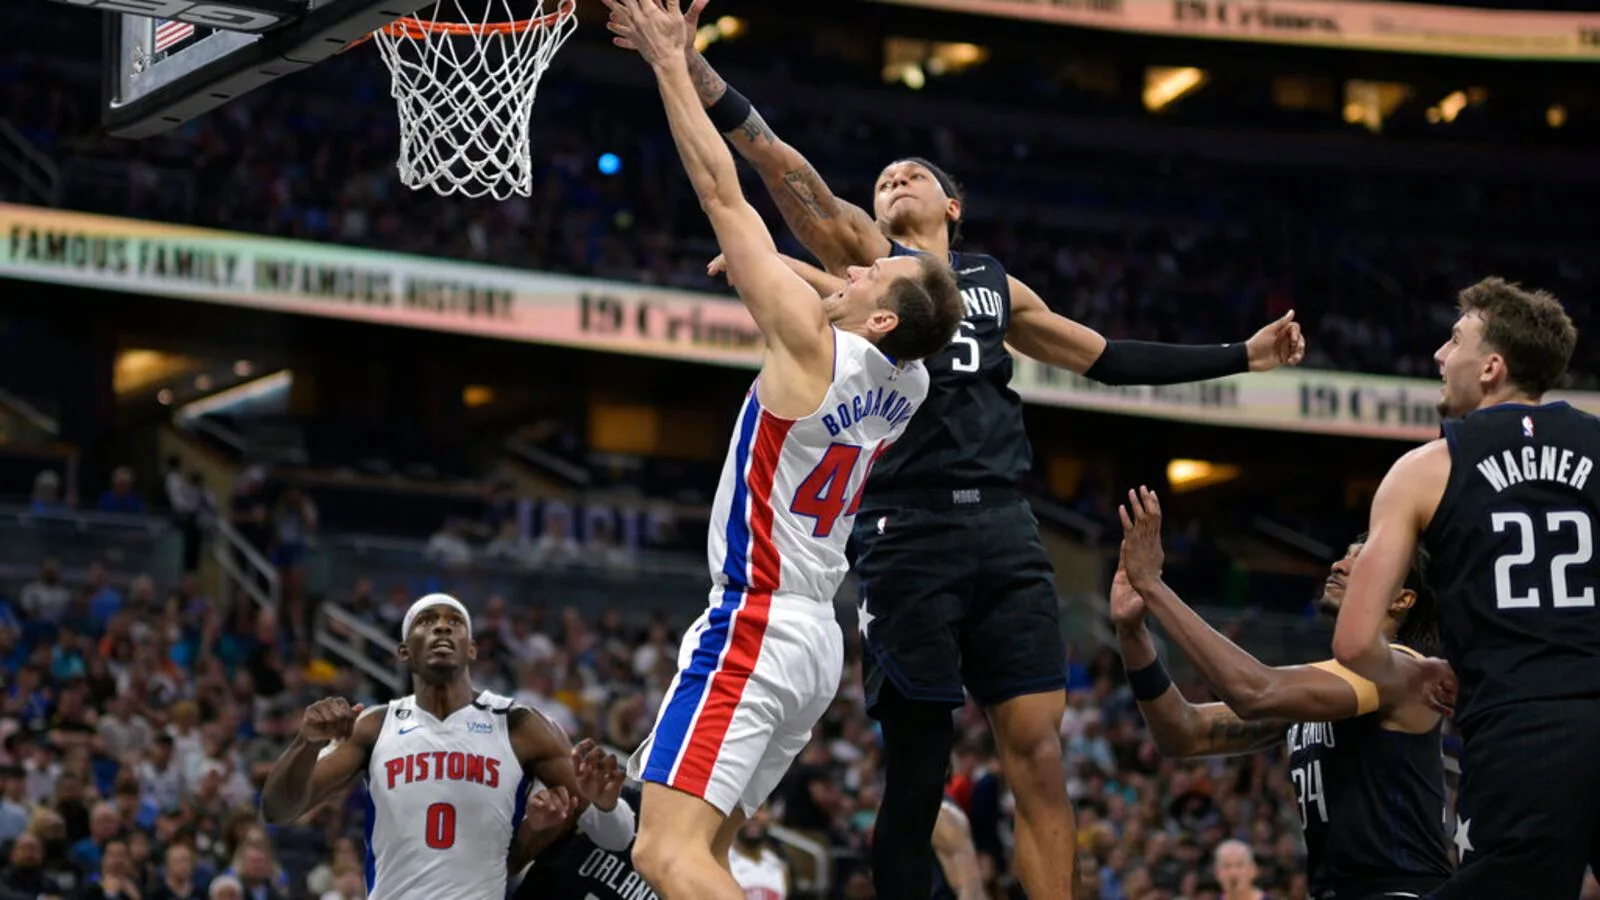 The Pistons face the Los Angeles Lakers on a 14-game losing streak.